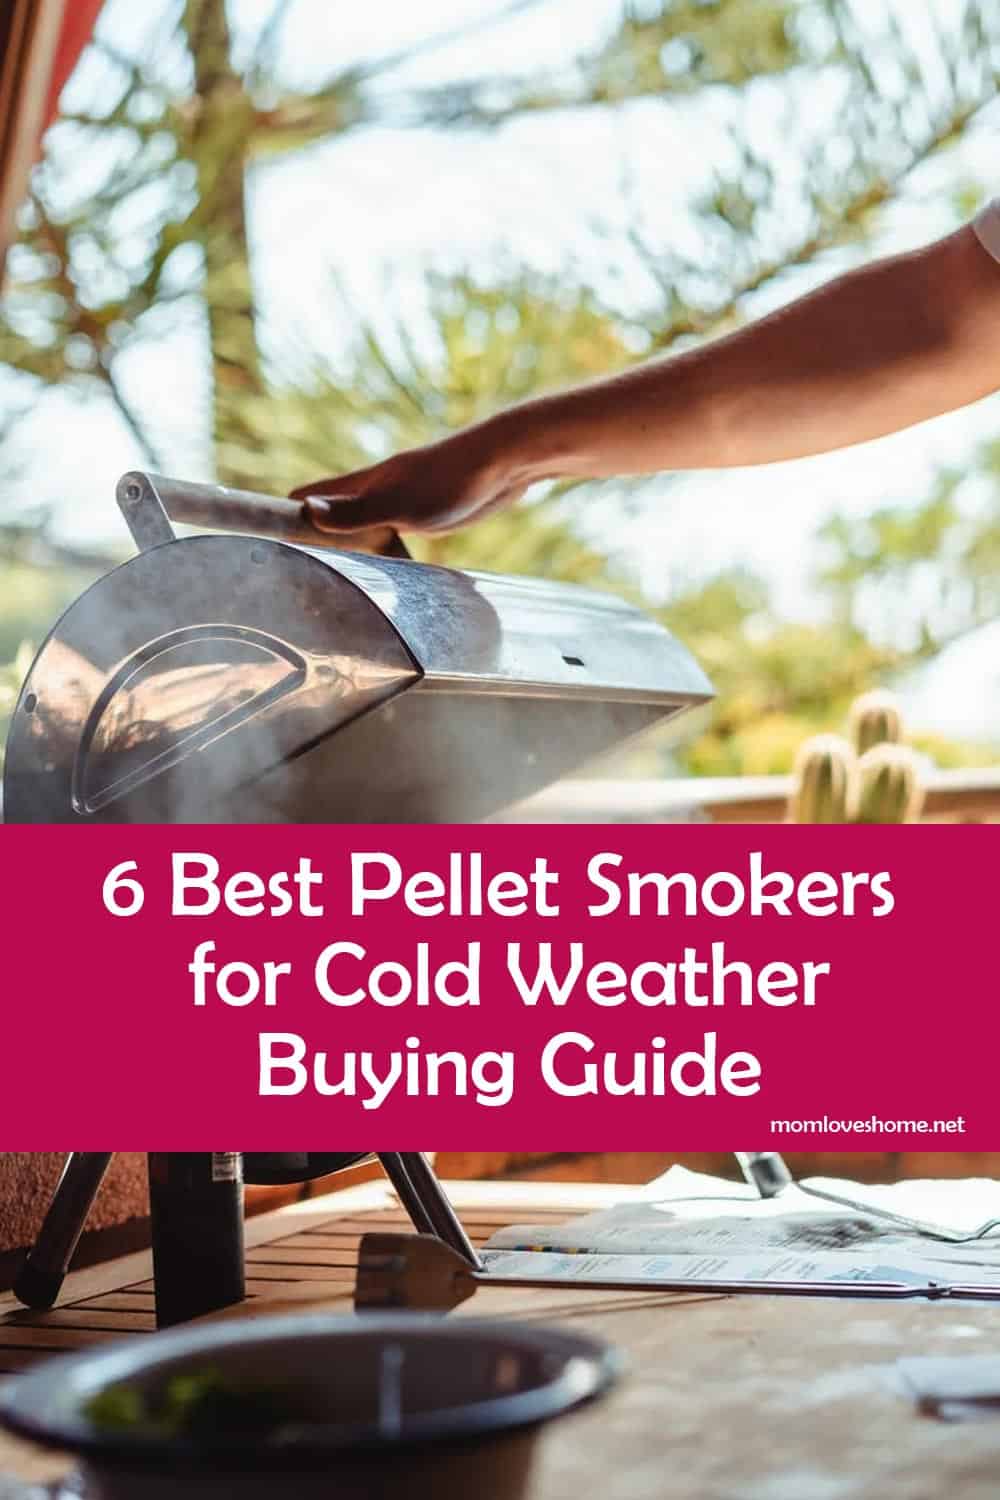 Best Pellet Smokers for Cold Weather